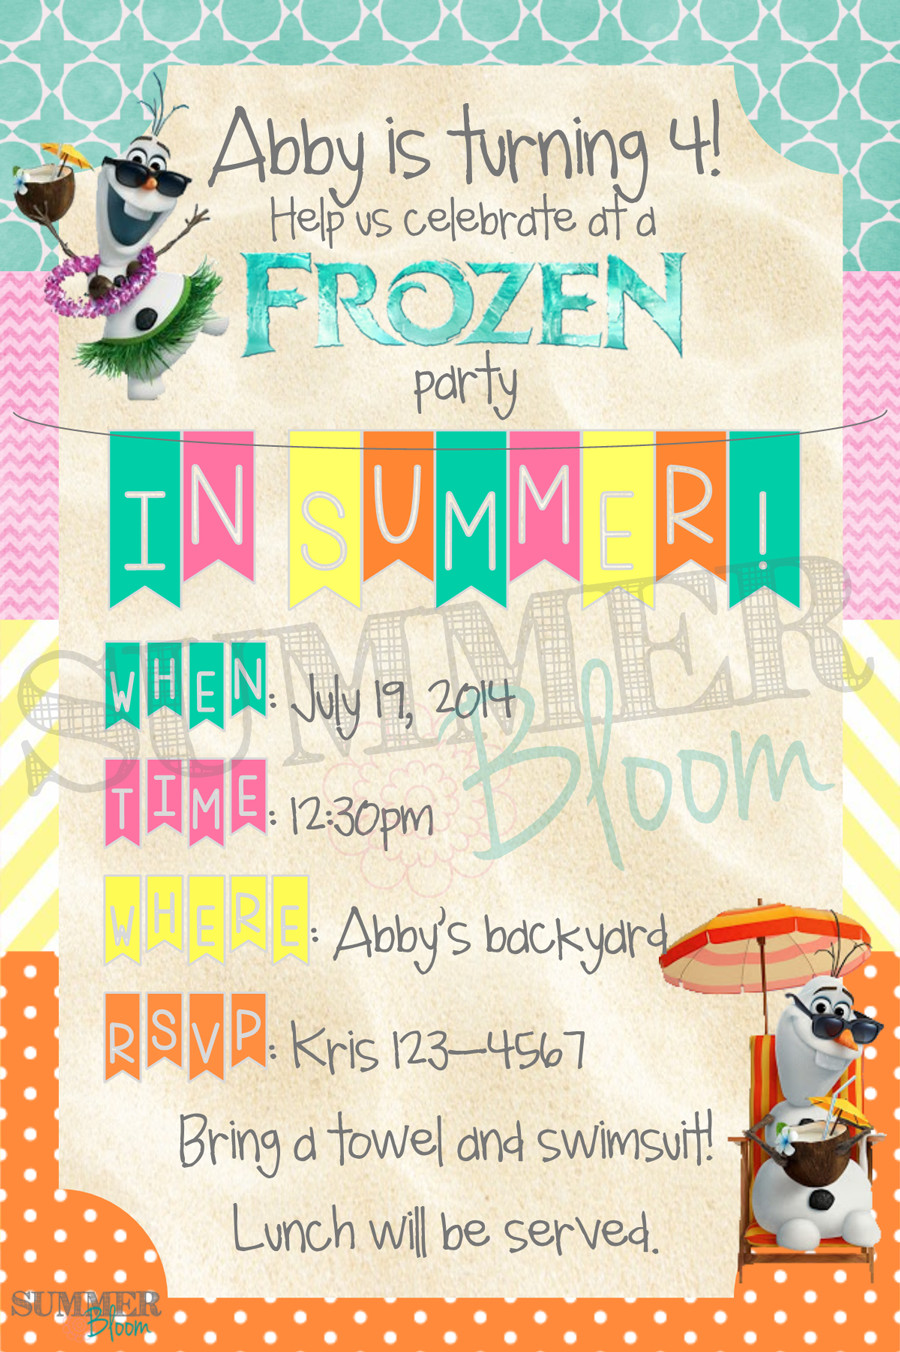 Summer Party Invitation Ideas
 Frozen and Olaf "In Summer" themed Birthday Party